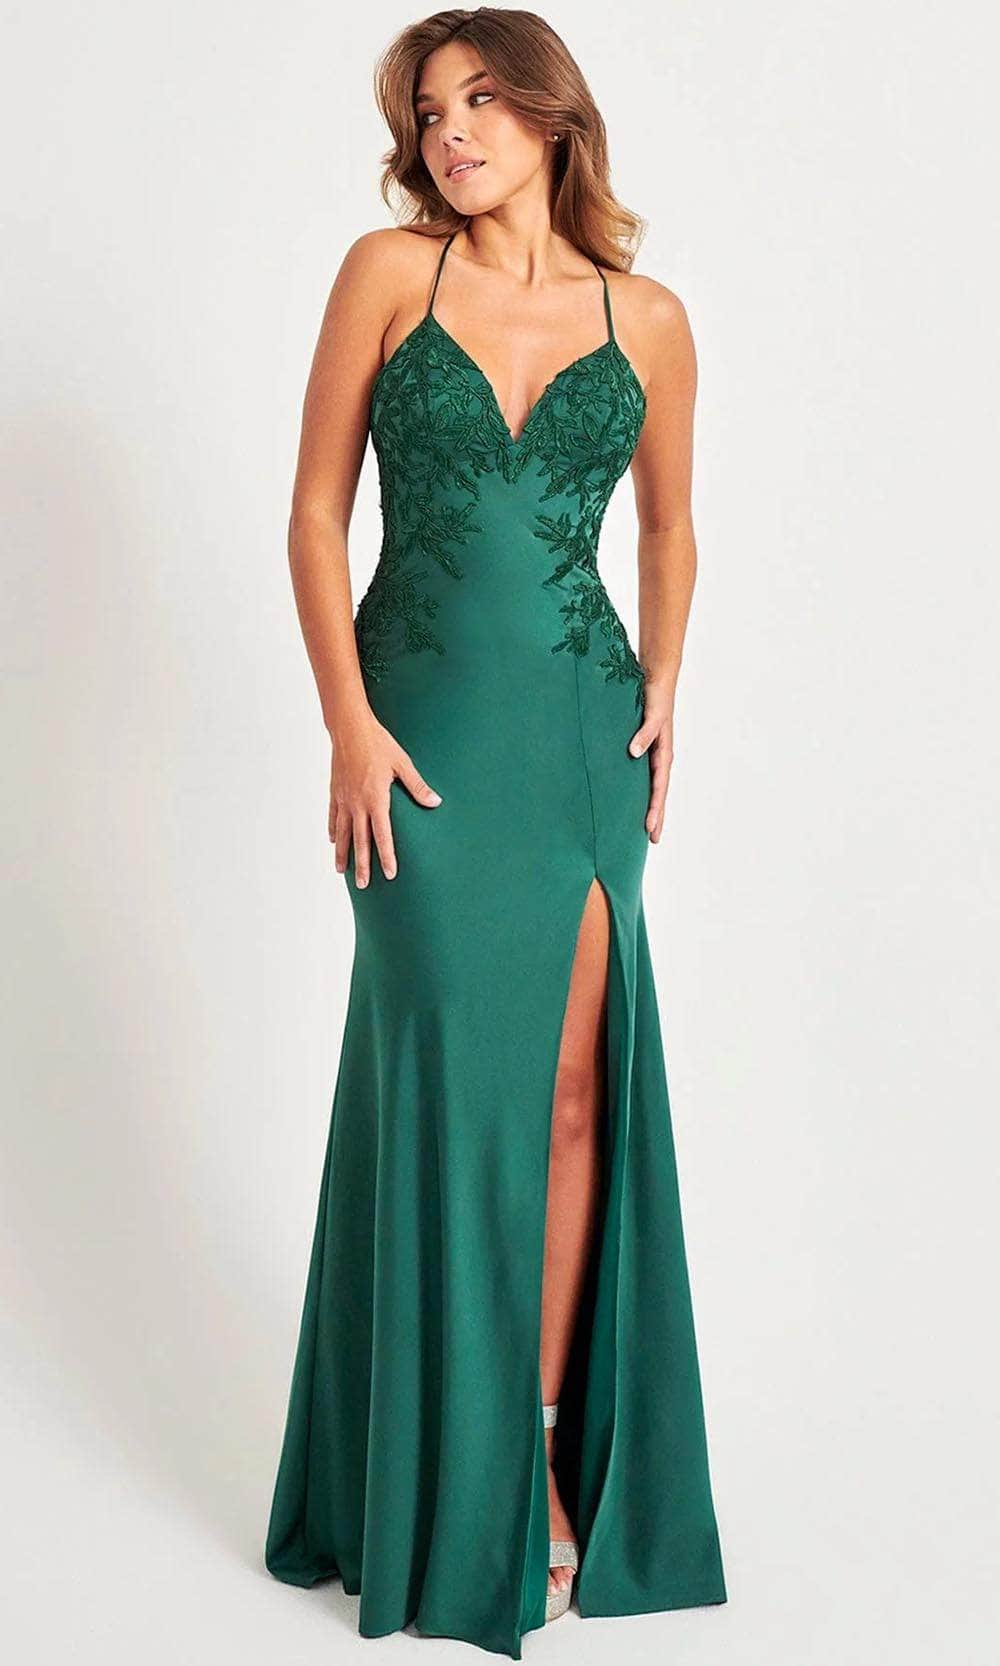 Faviana 11070 - Lace Up Back Satin Prom Gown
